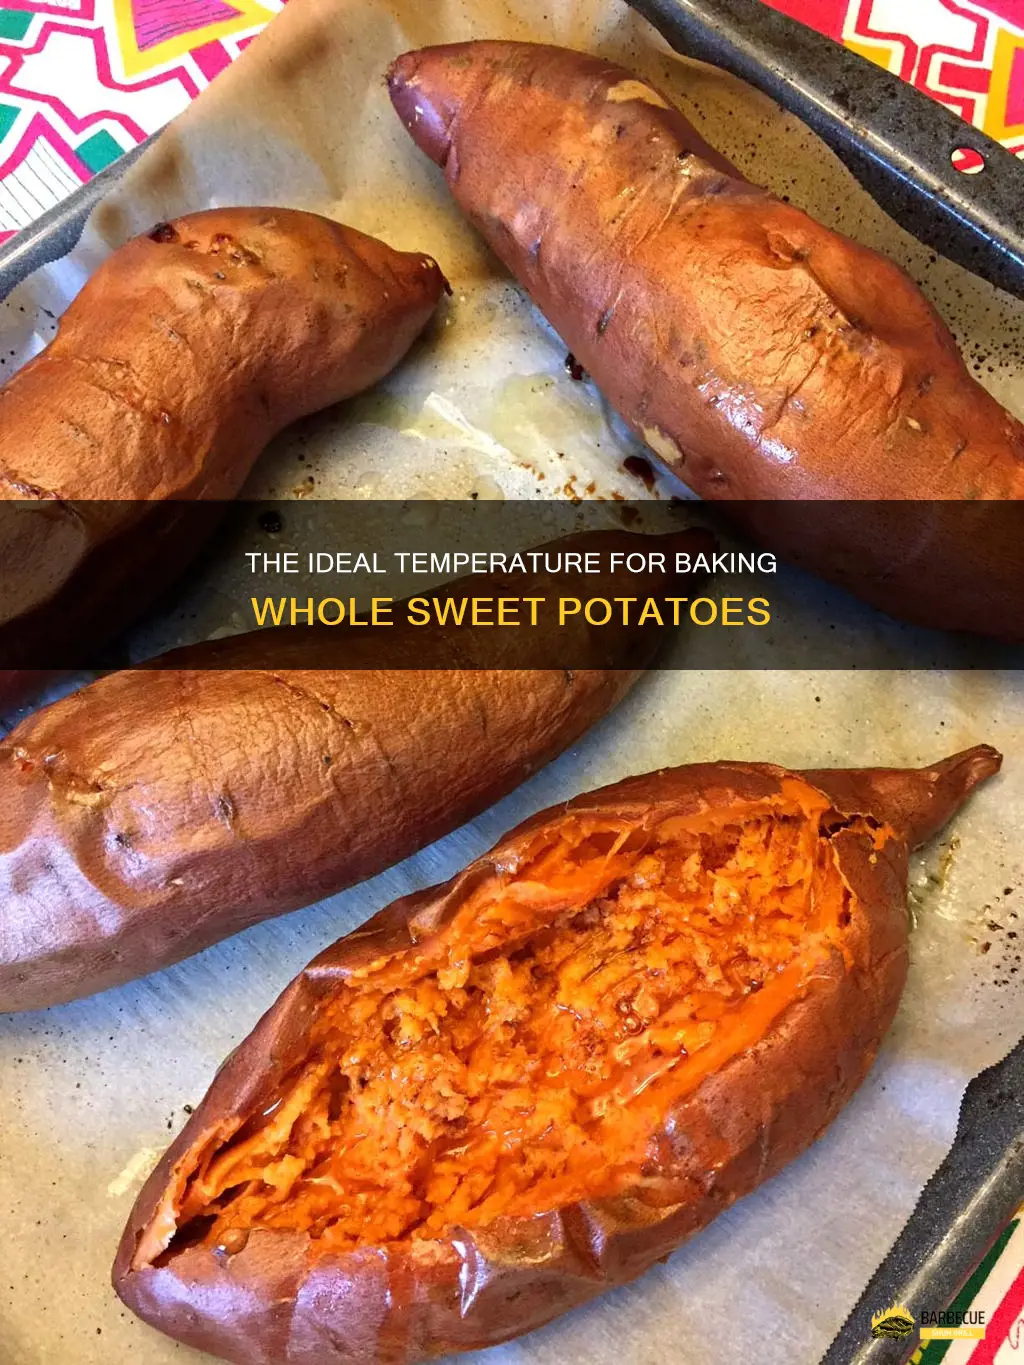 The Ideal Temperature For Baking Whole Sweet Potatoes | ShunGrill